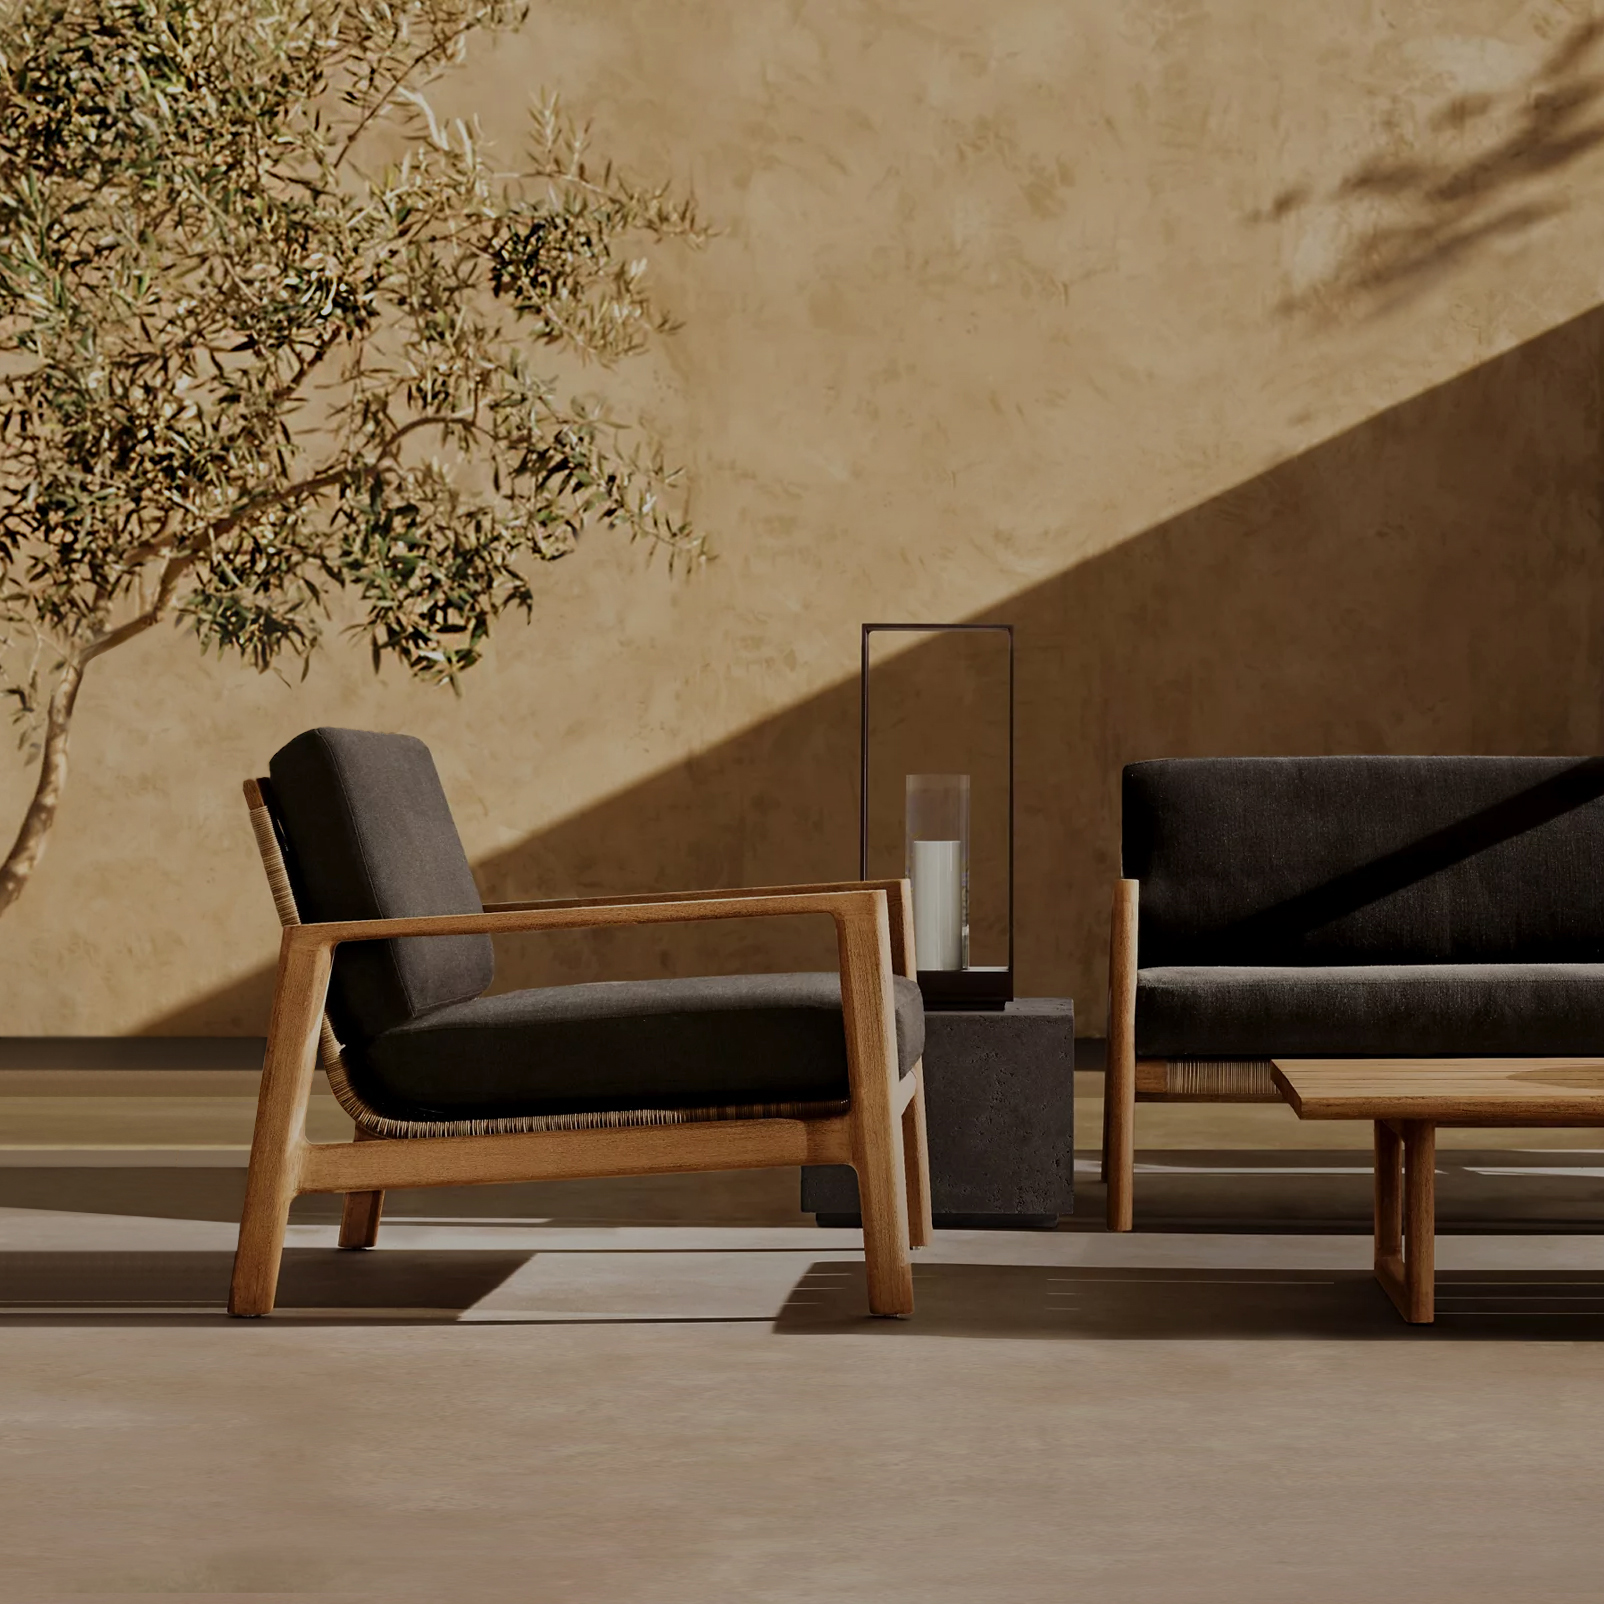 Mesa outdoor collection lounge chair, sofa and coffee table by Mario Ruiz for Joquer